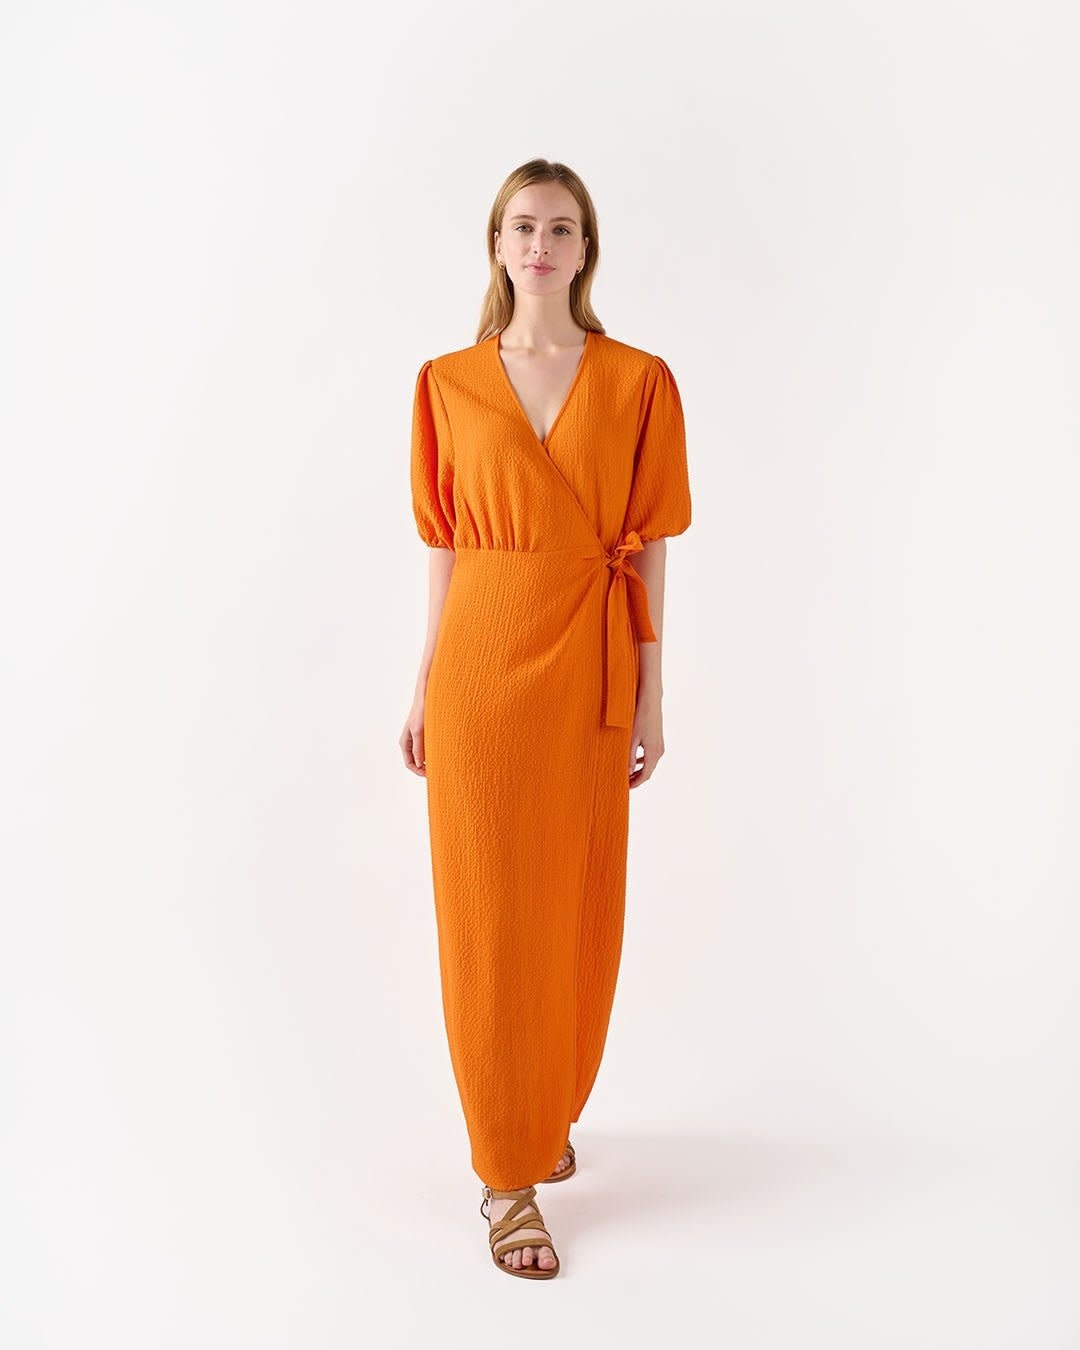 Another-Label Another-Label, Camille Bubble Dress, harvest pumpkin, S